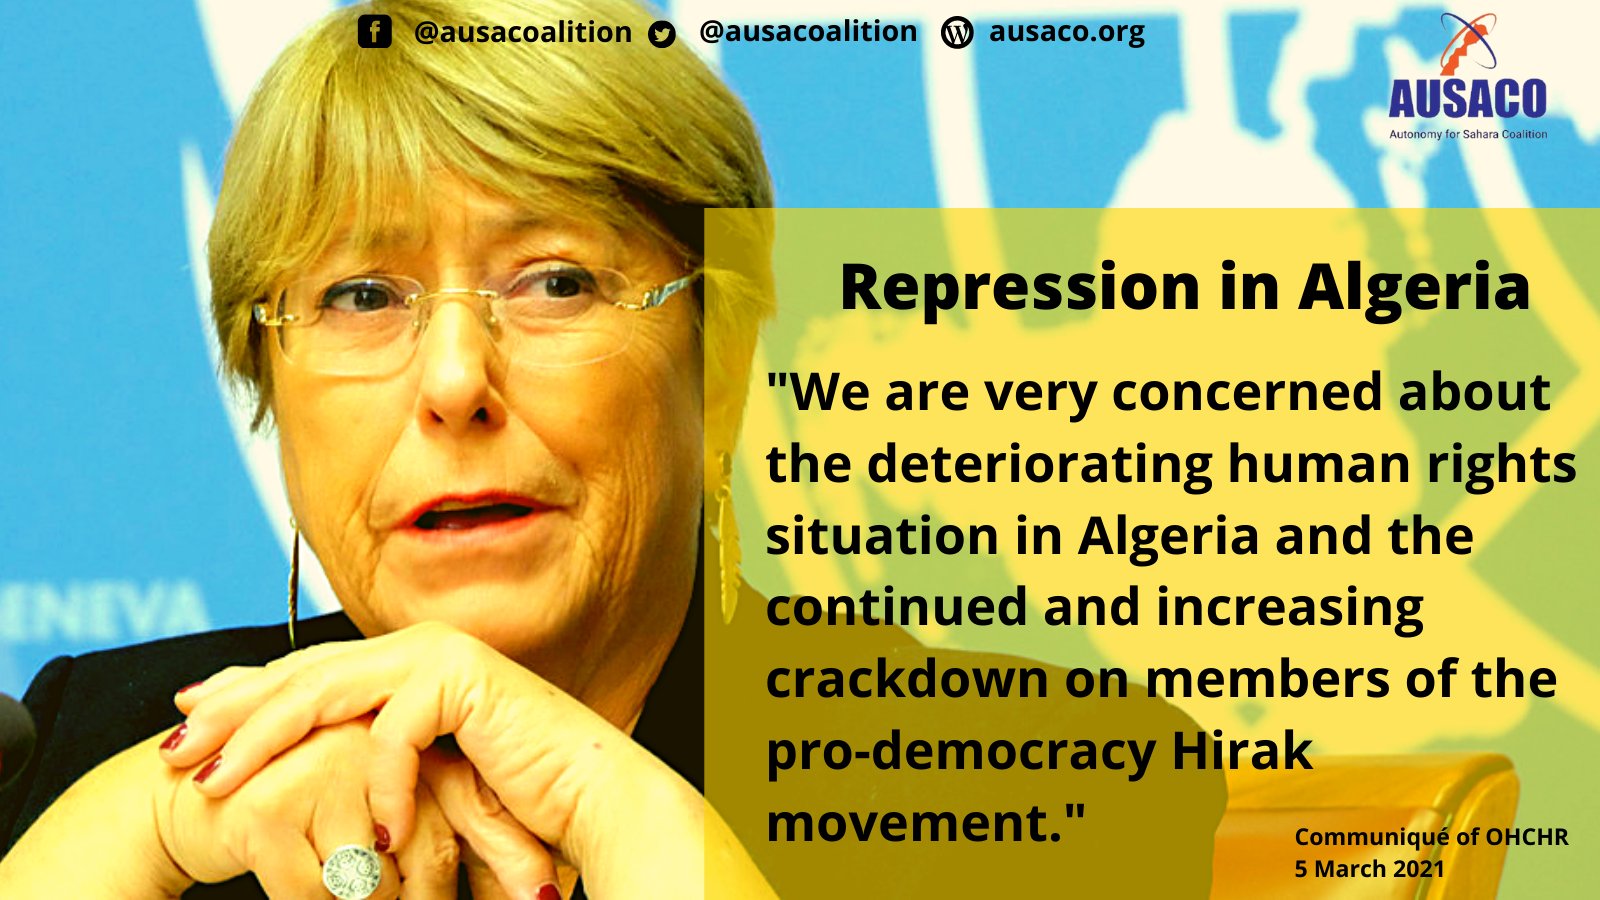 #Tindouf_camps still falls prey to this repressive apparatus in #Algeria that stifles voices of freedom. We urge the #international community and all #freedom-loving forces to uphold #human_rights in Algeria.